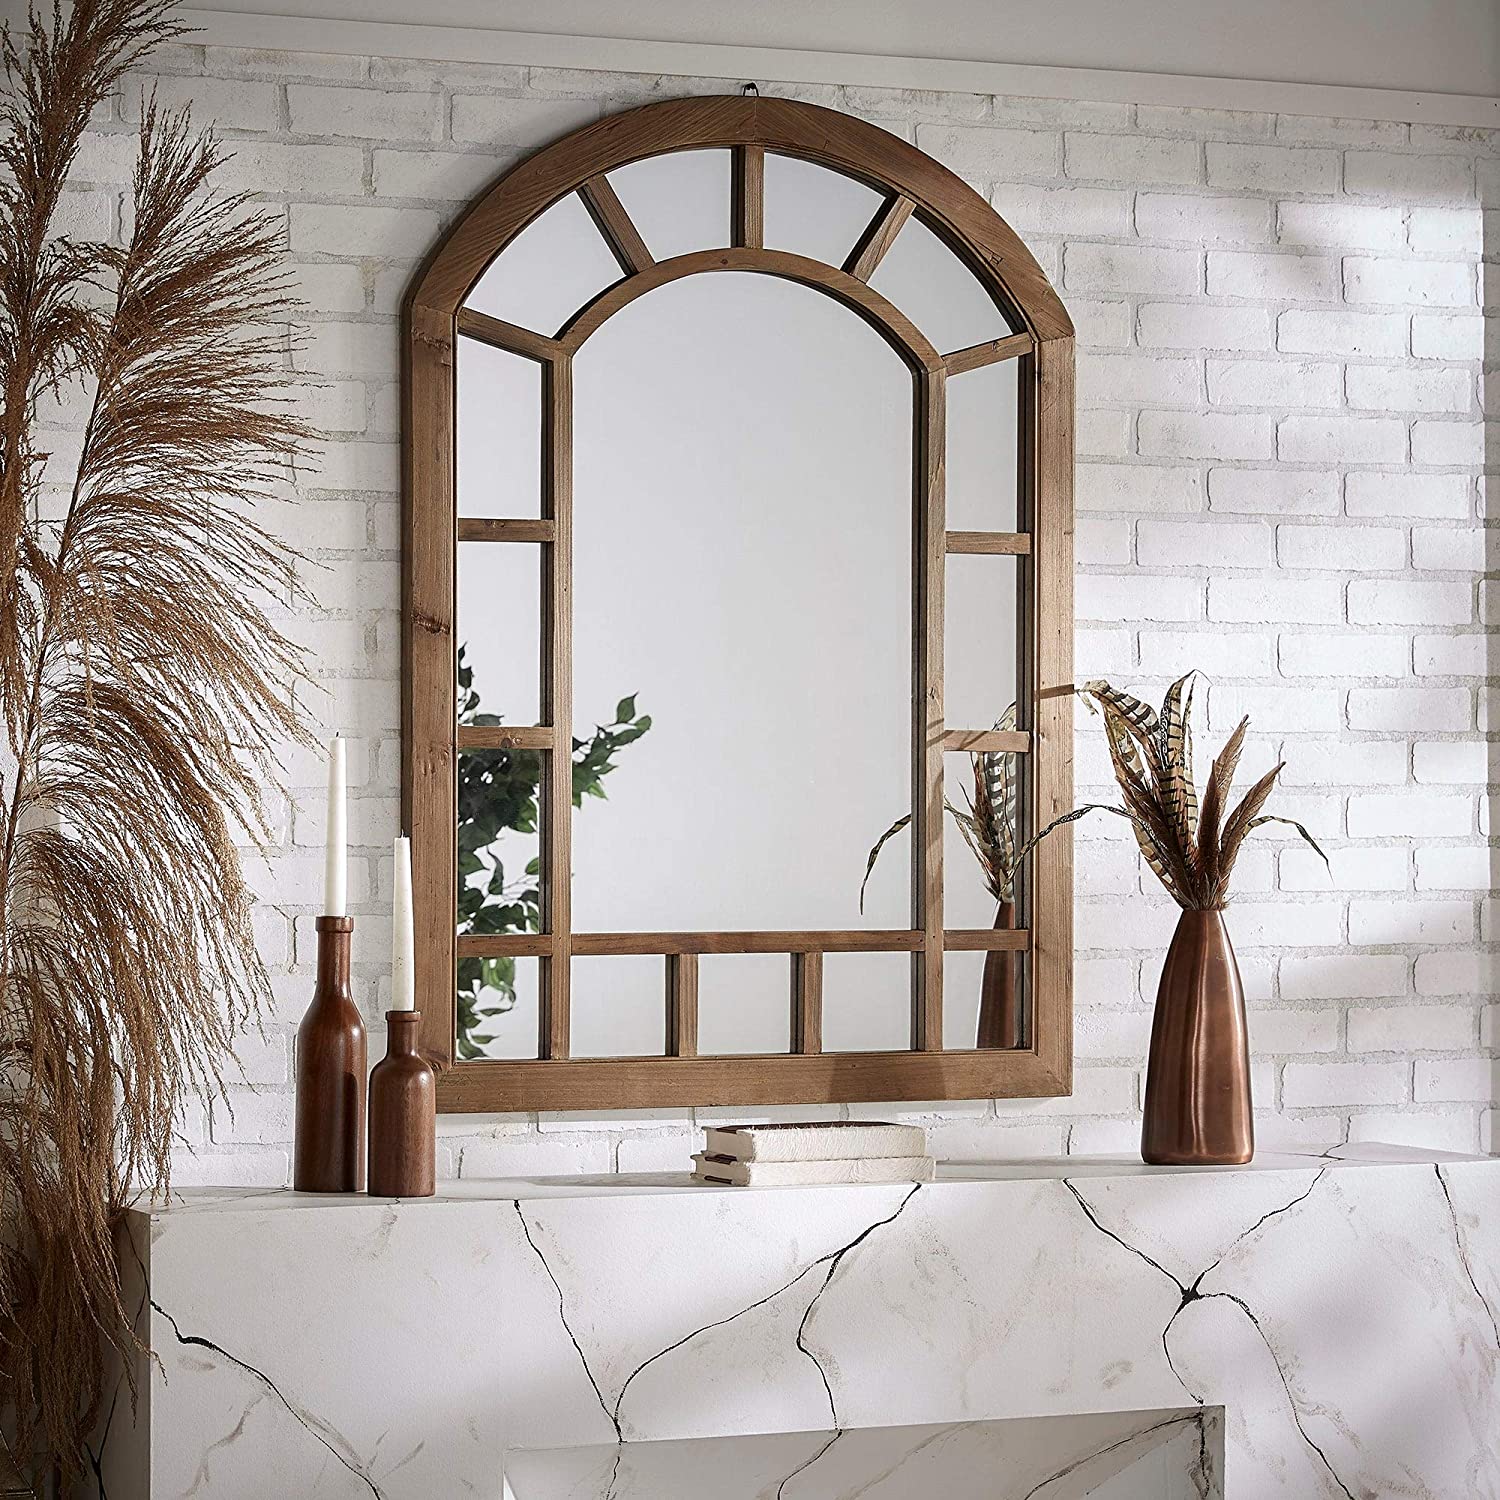 Unknown1 Wood Arched Windowpane Wall Mirror Artisan Brown Rustic Includes Hardware